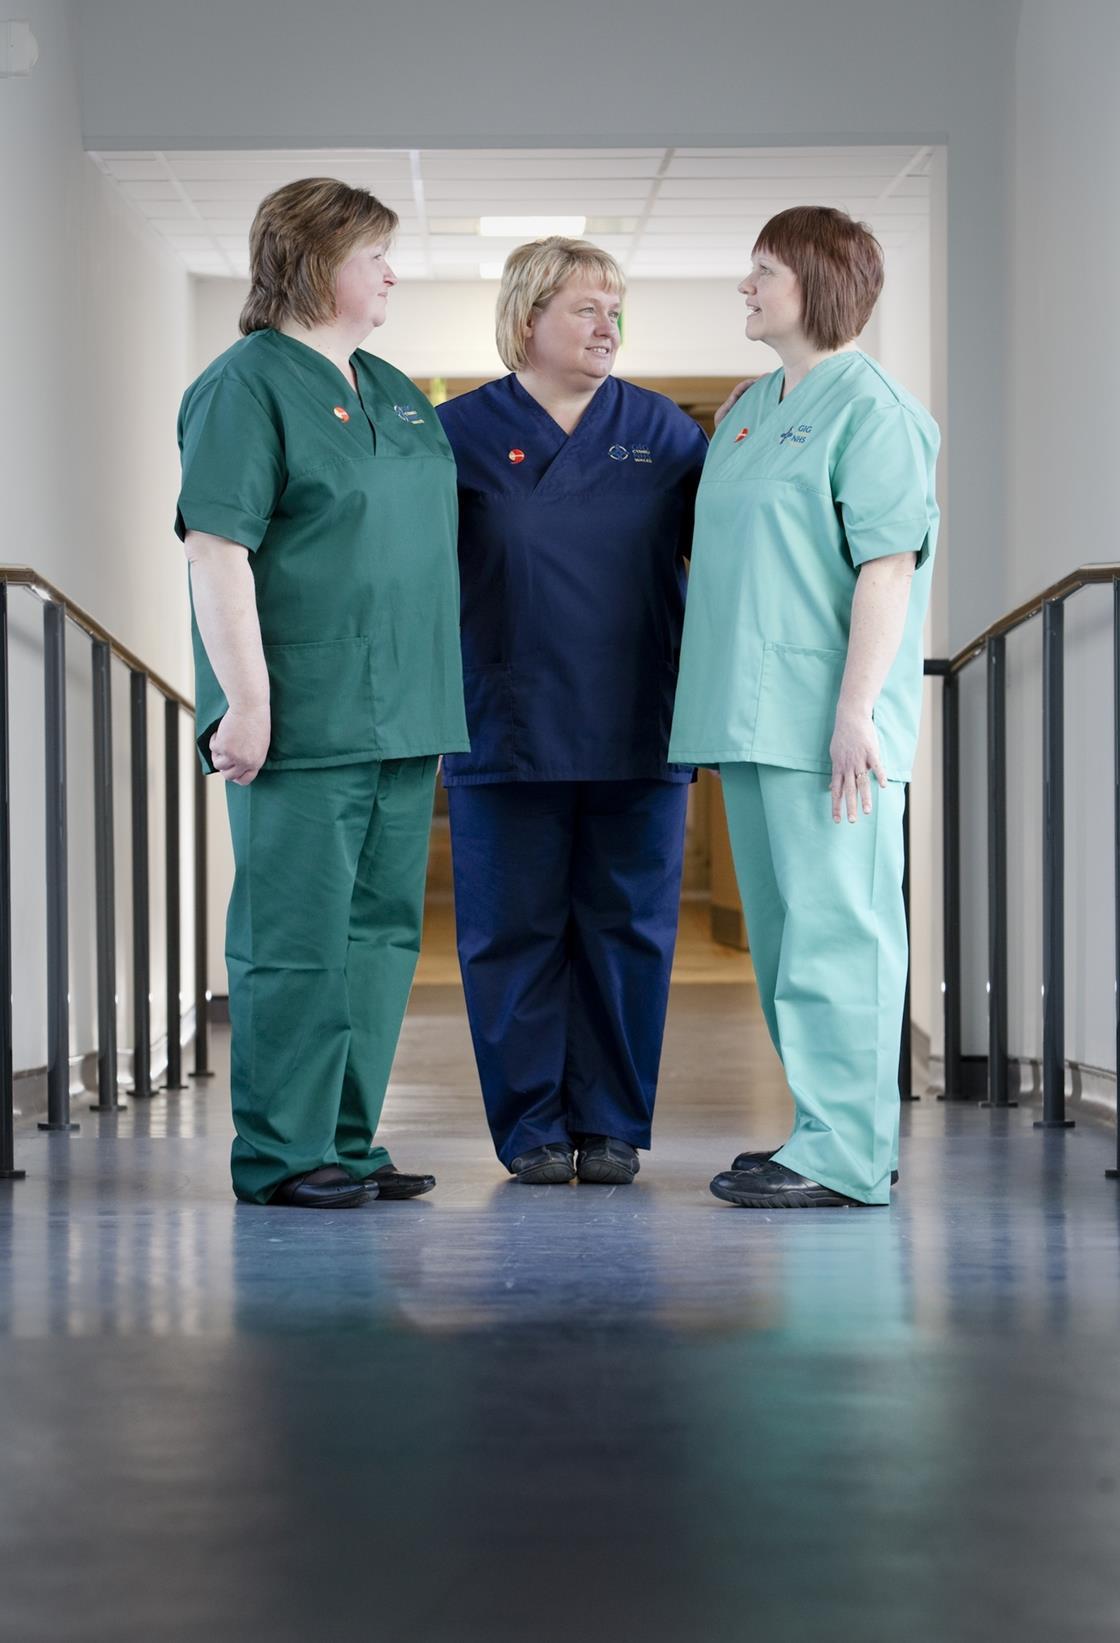 New £1 5m Nhs Uniforms Cause Rashes News Health Service Journal